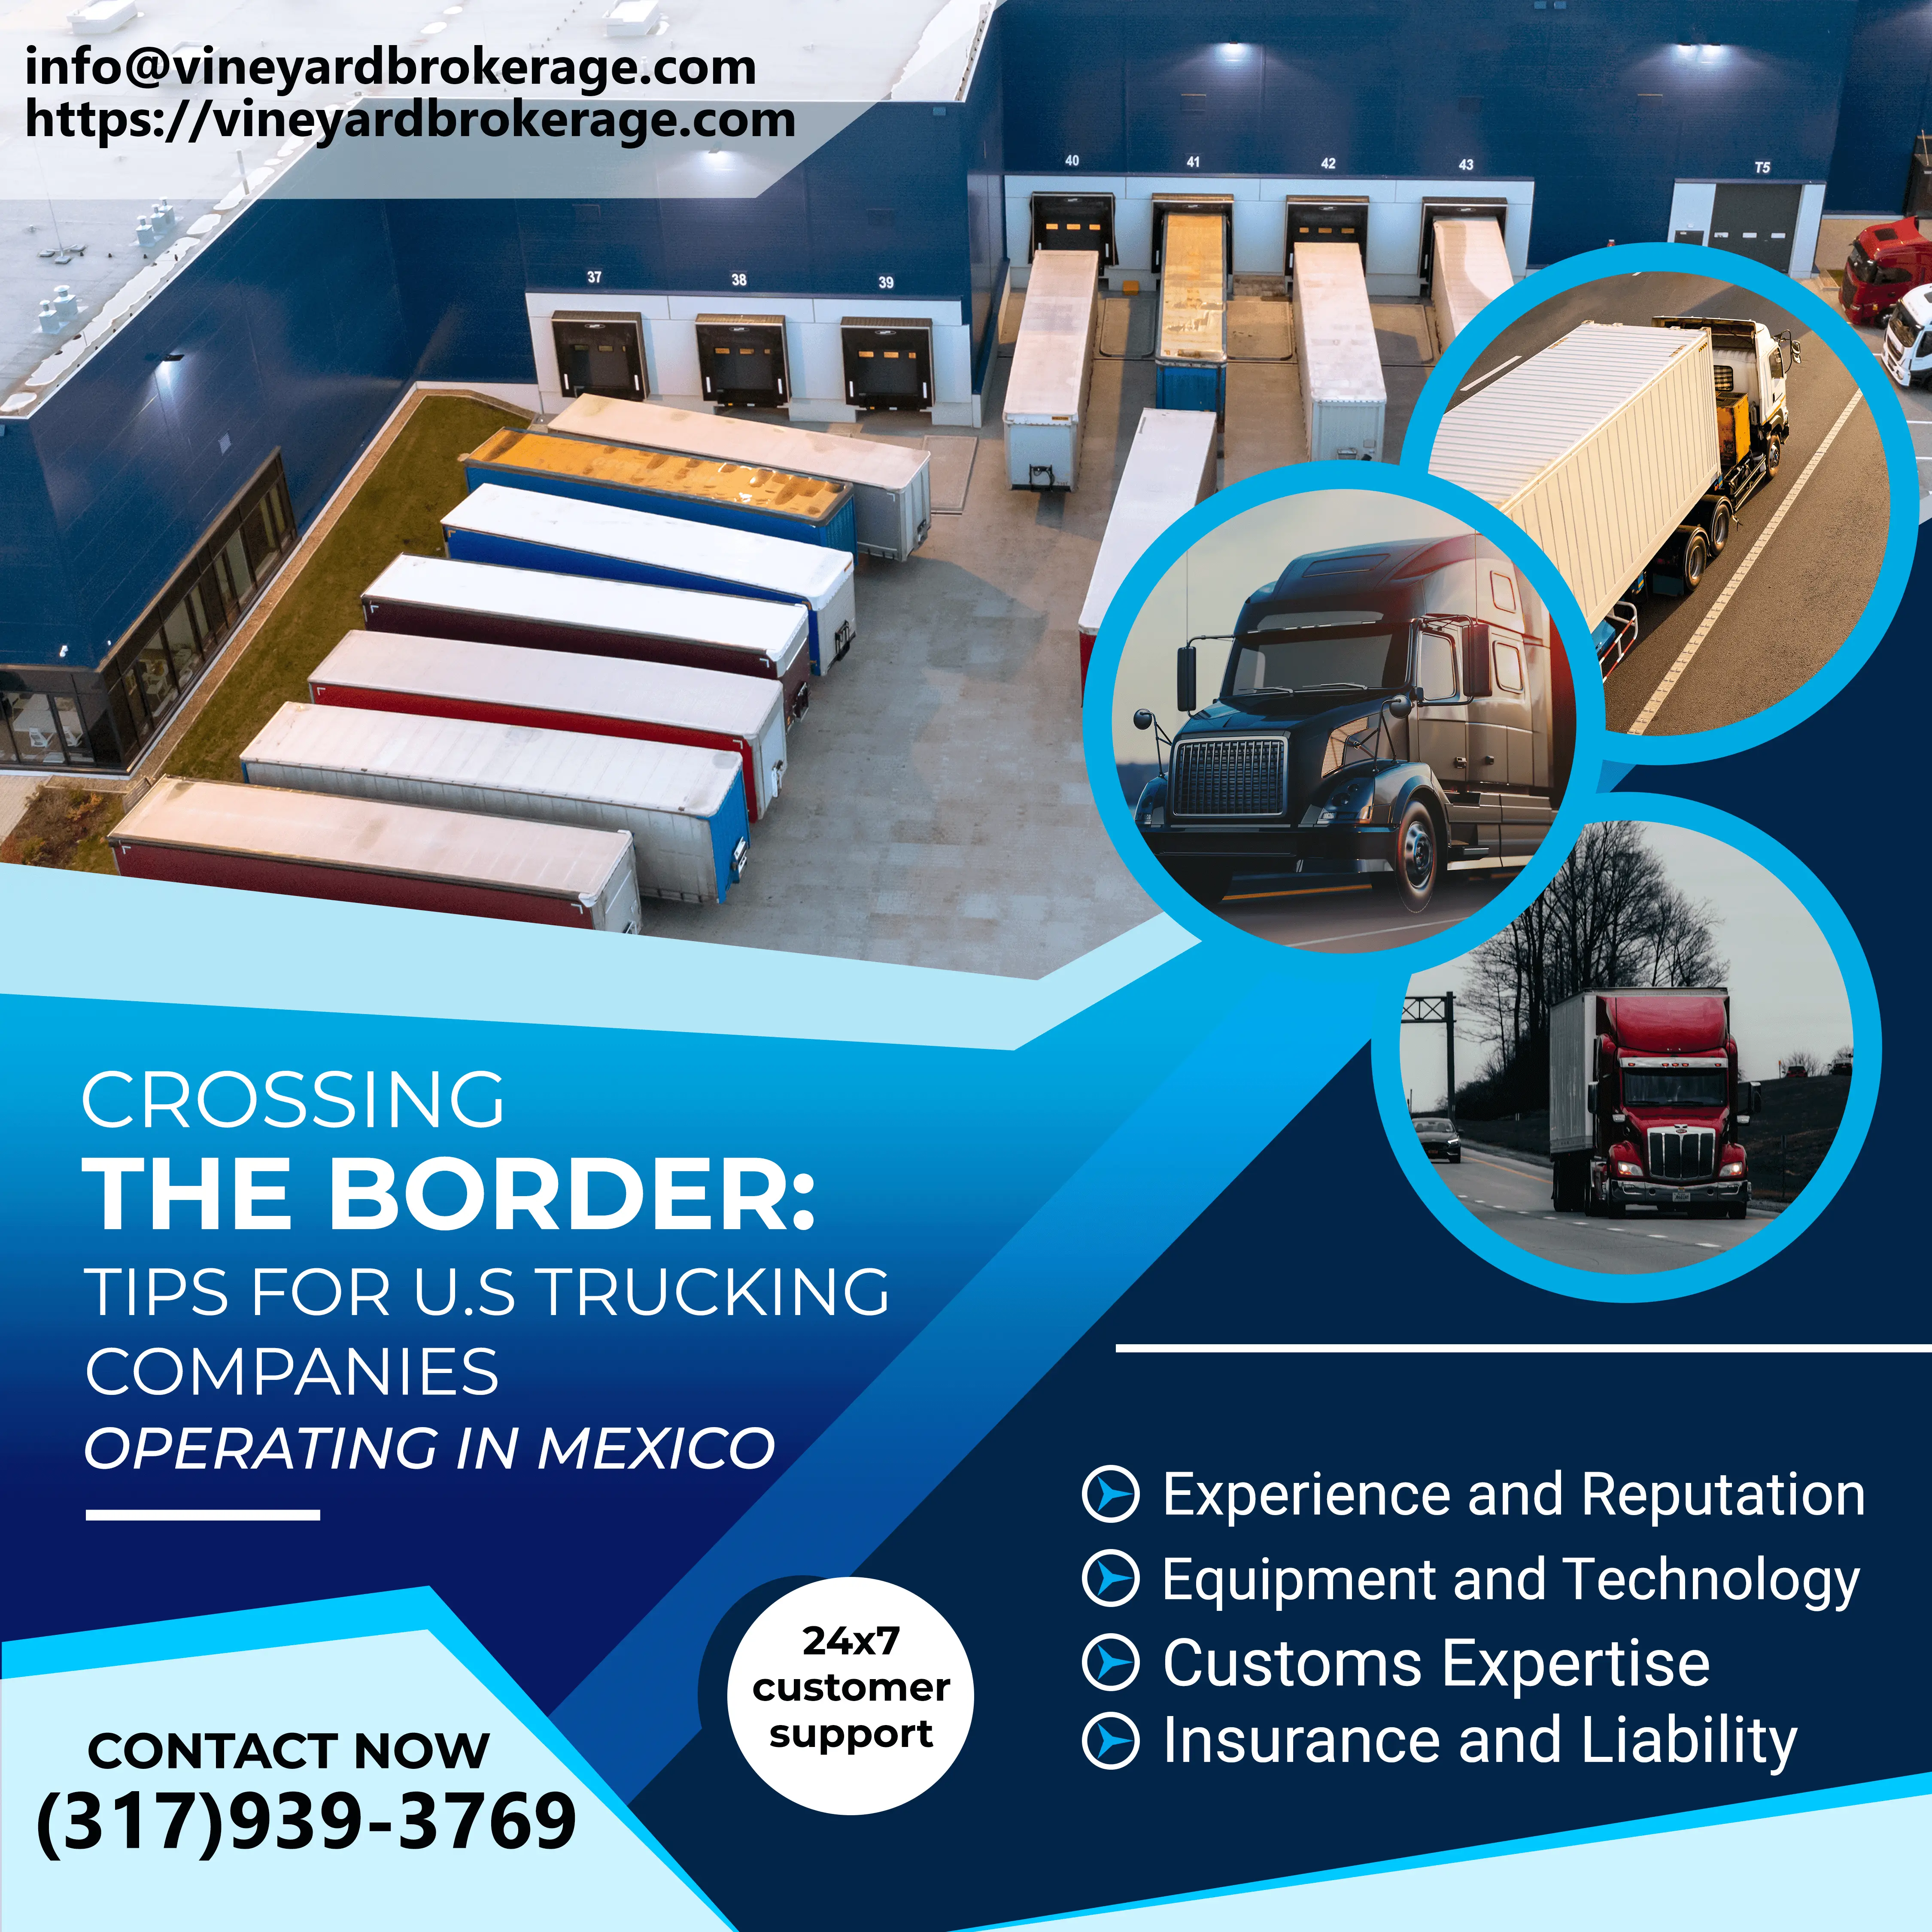 Crossing-the-Border-Tips-for-U.S.-Trucking-Companies-Operating-in-Mexico